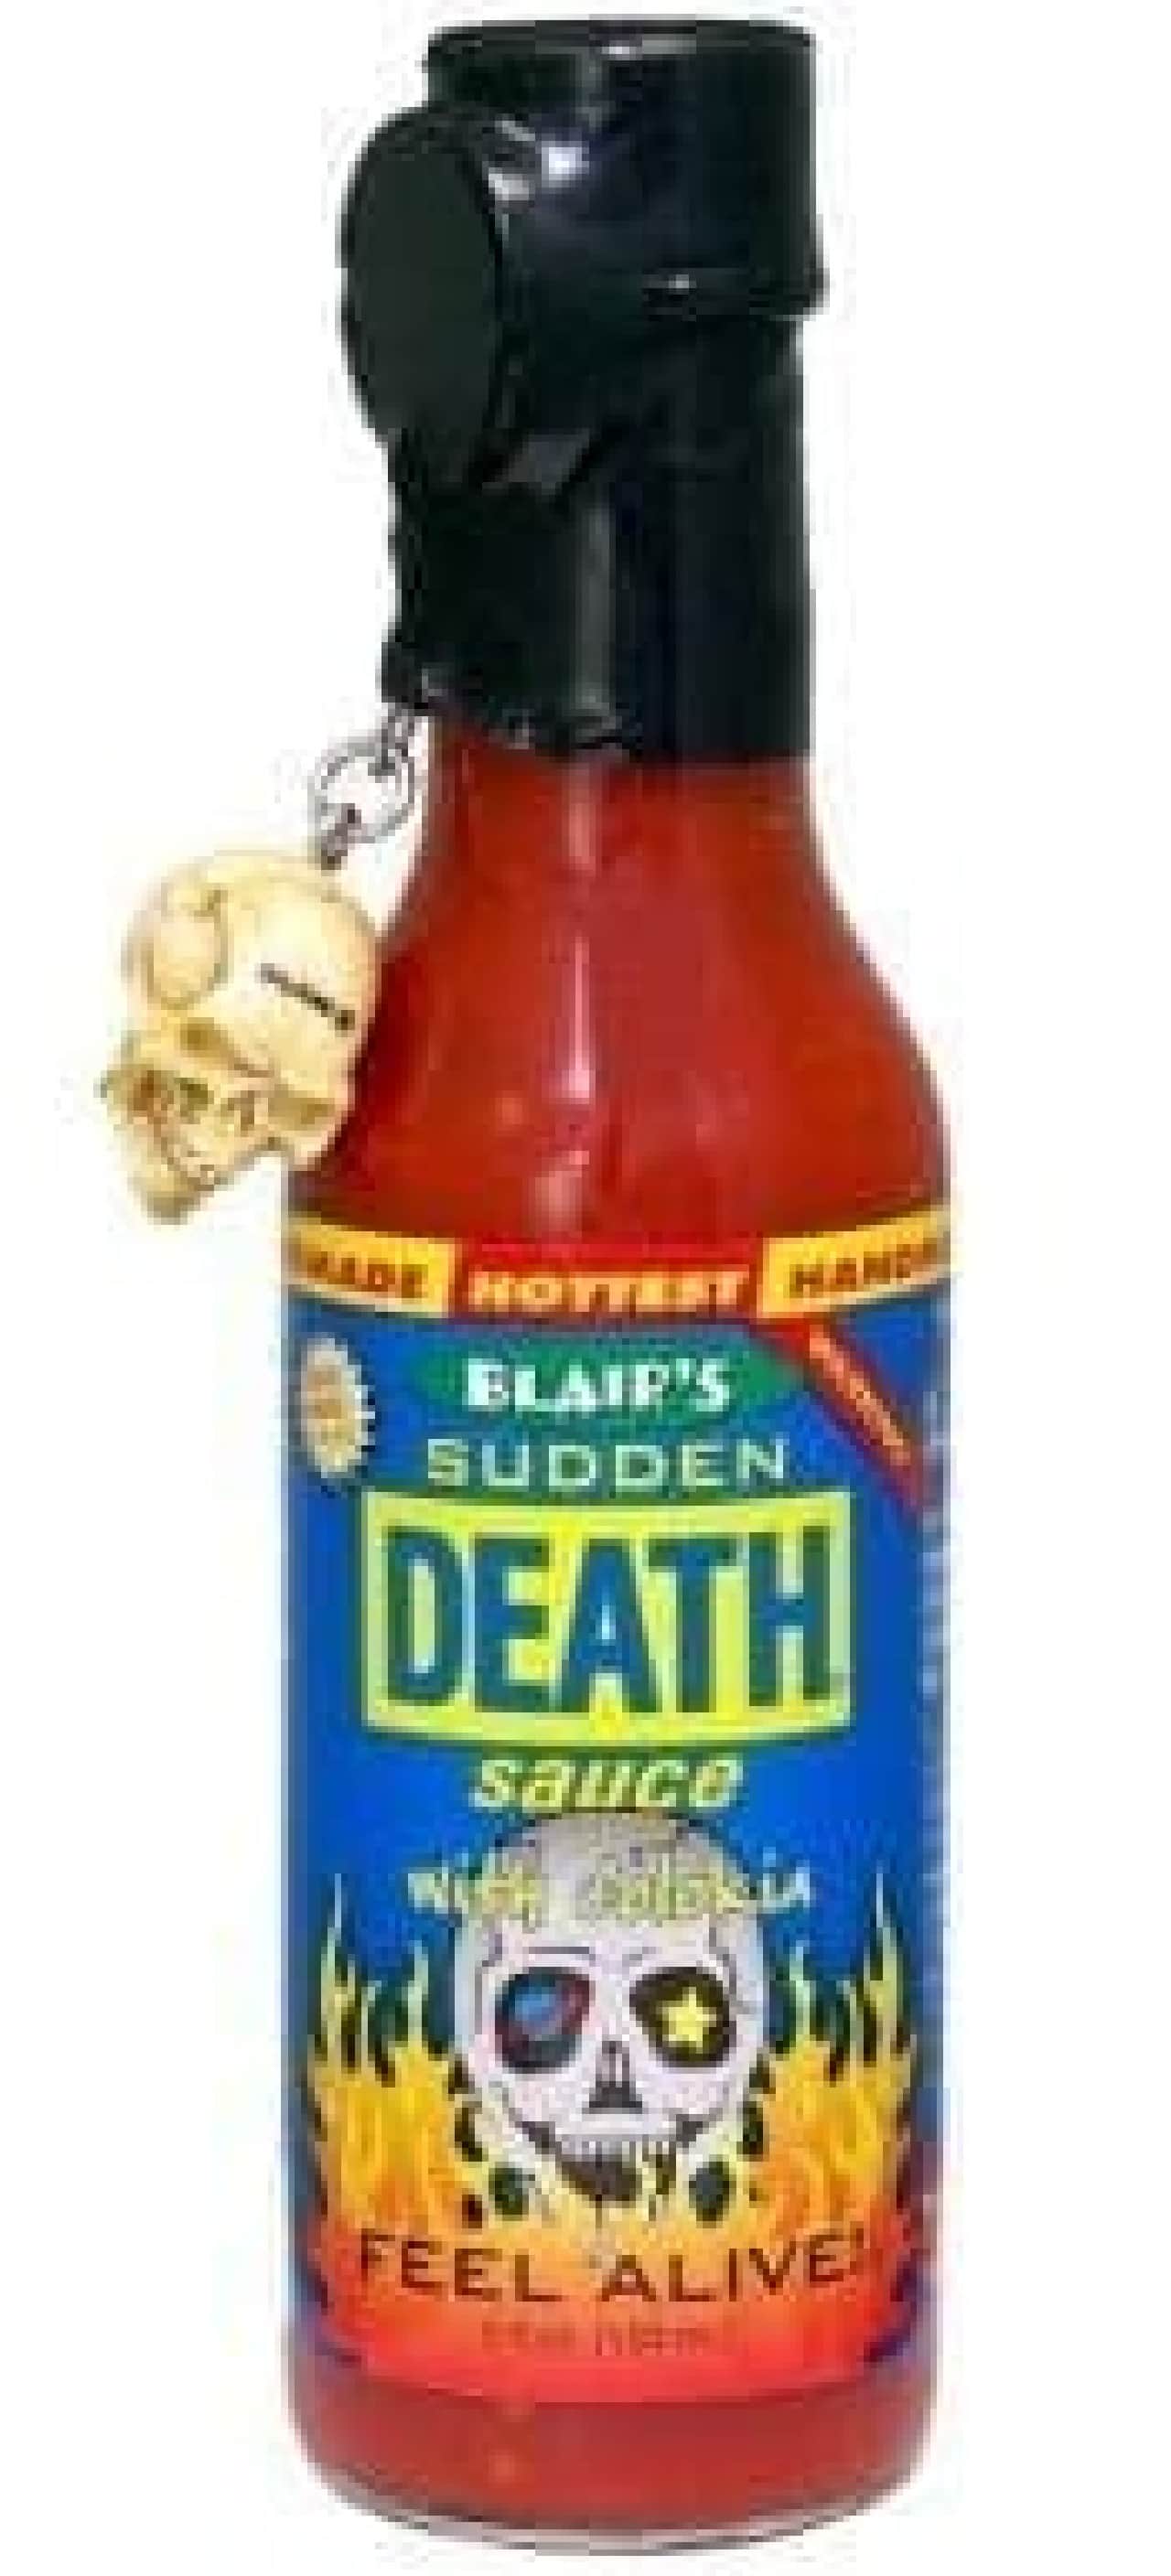 Reference image "Sudden Death Source"